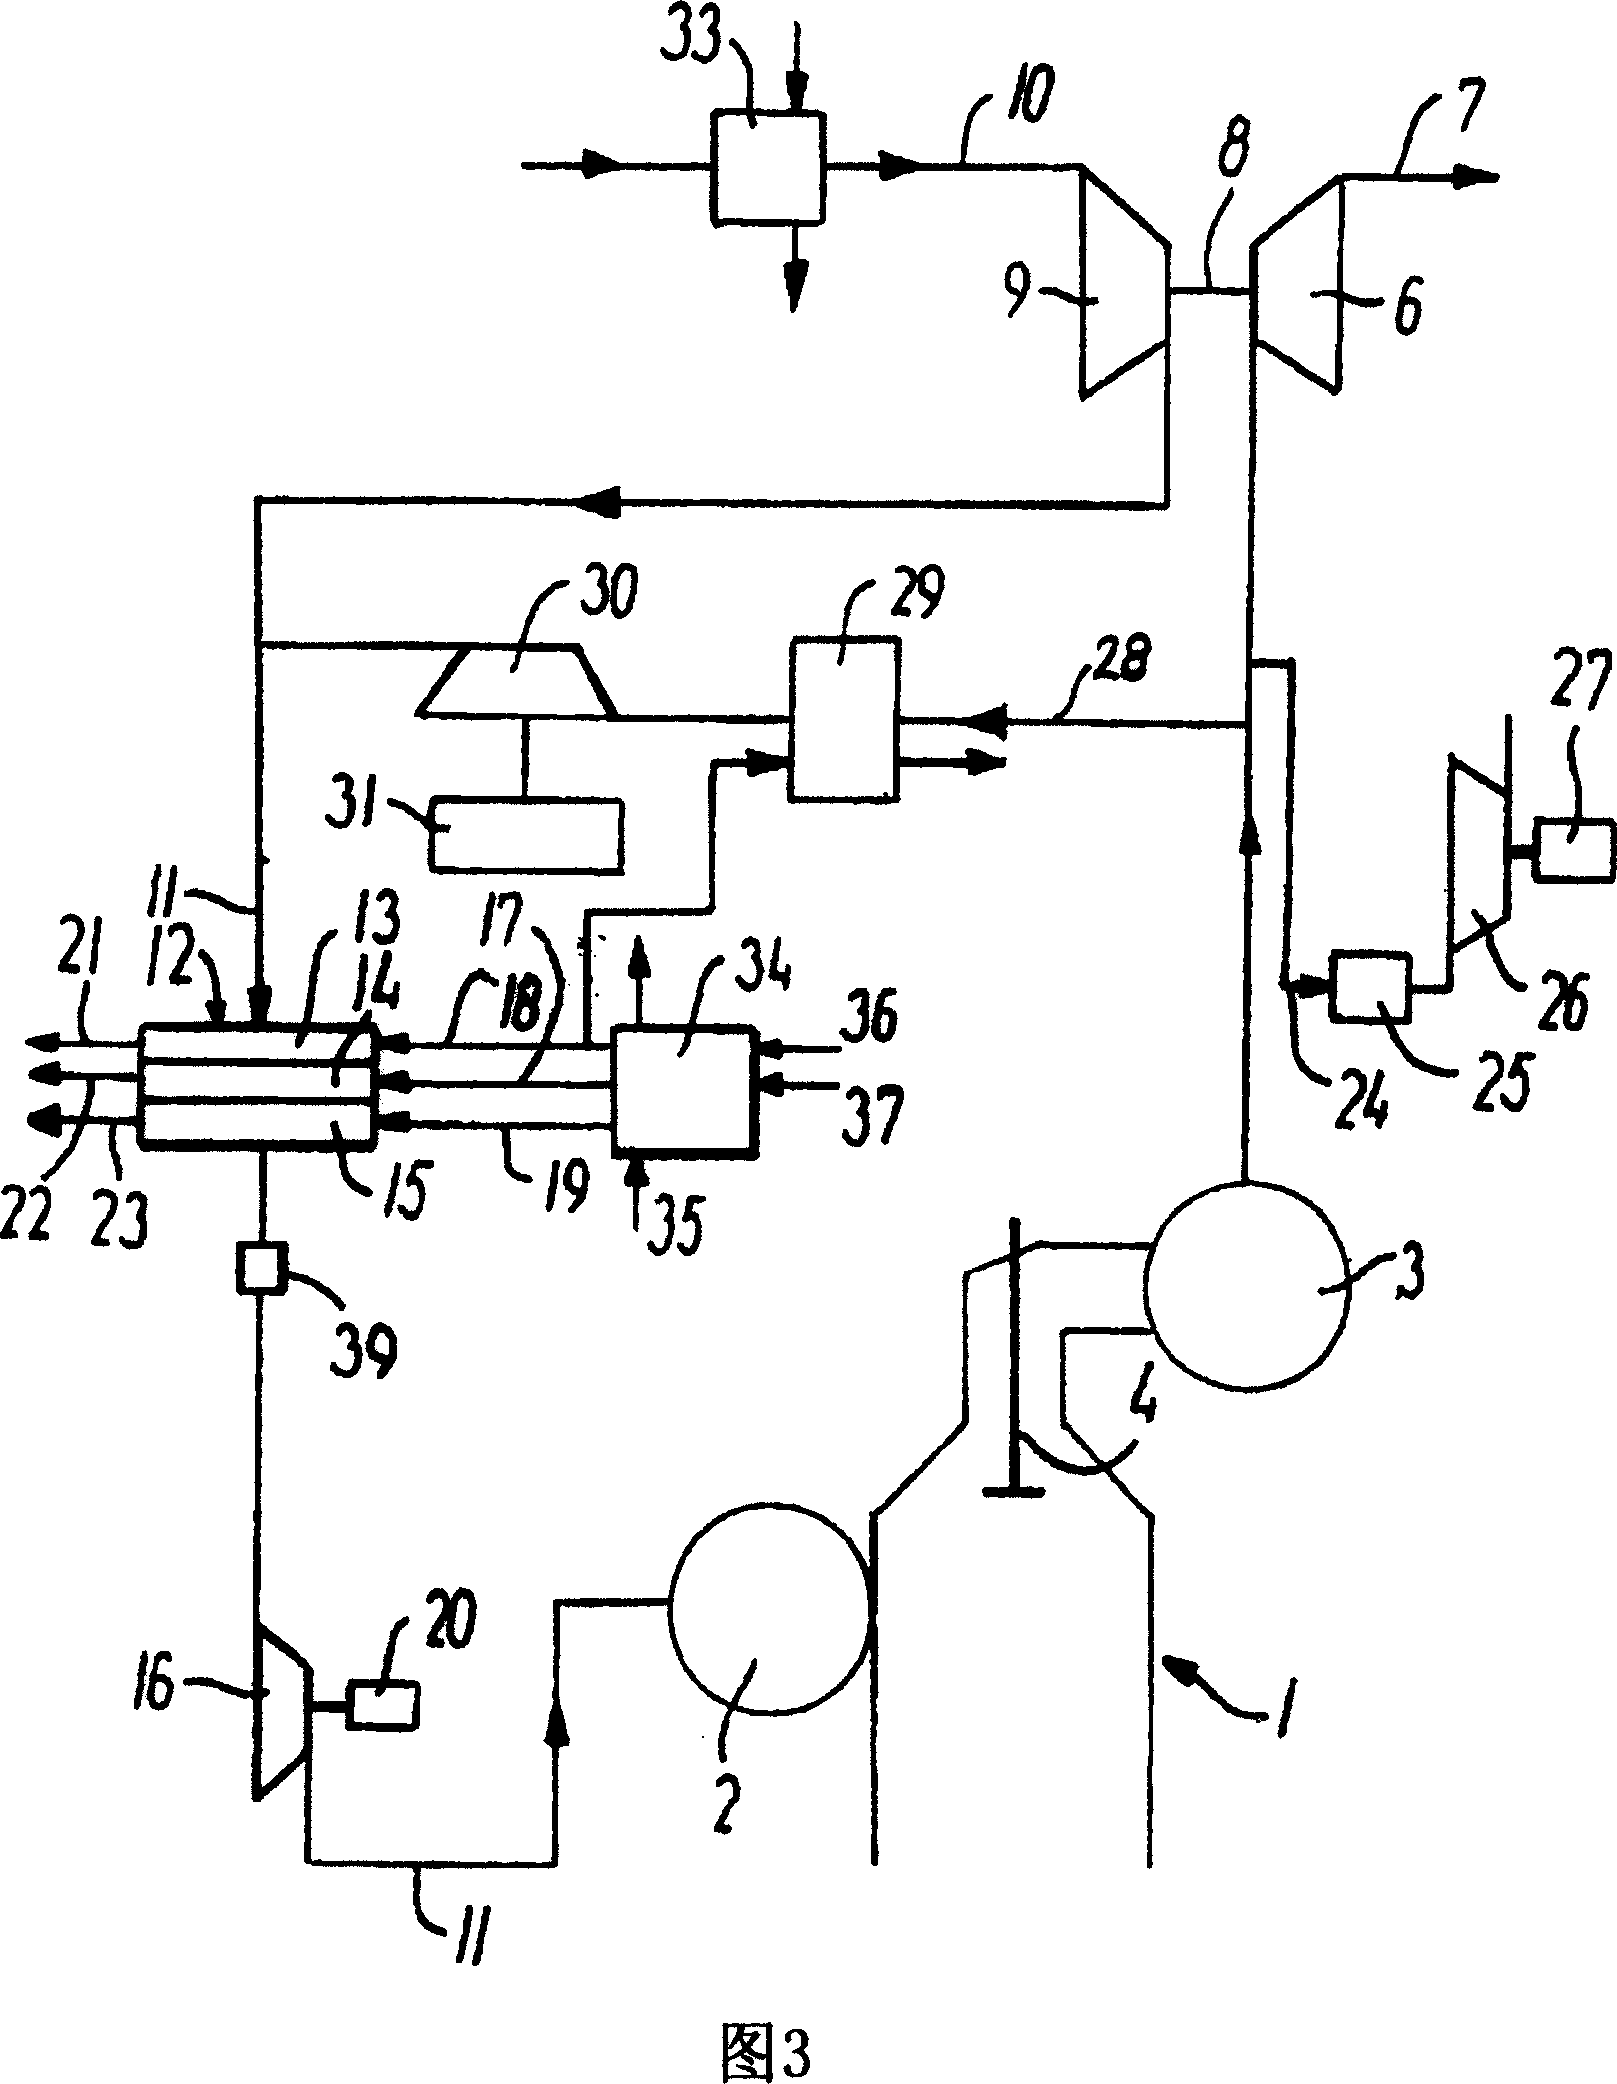 Large internal combustion engine with supercharger